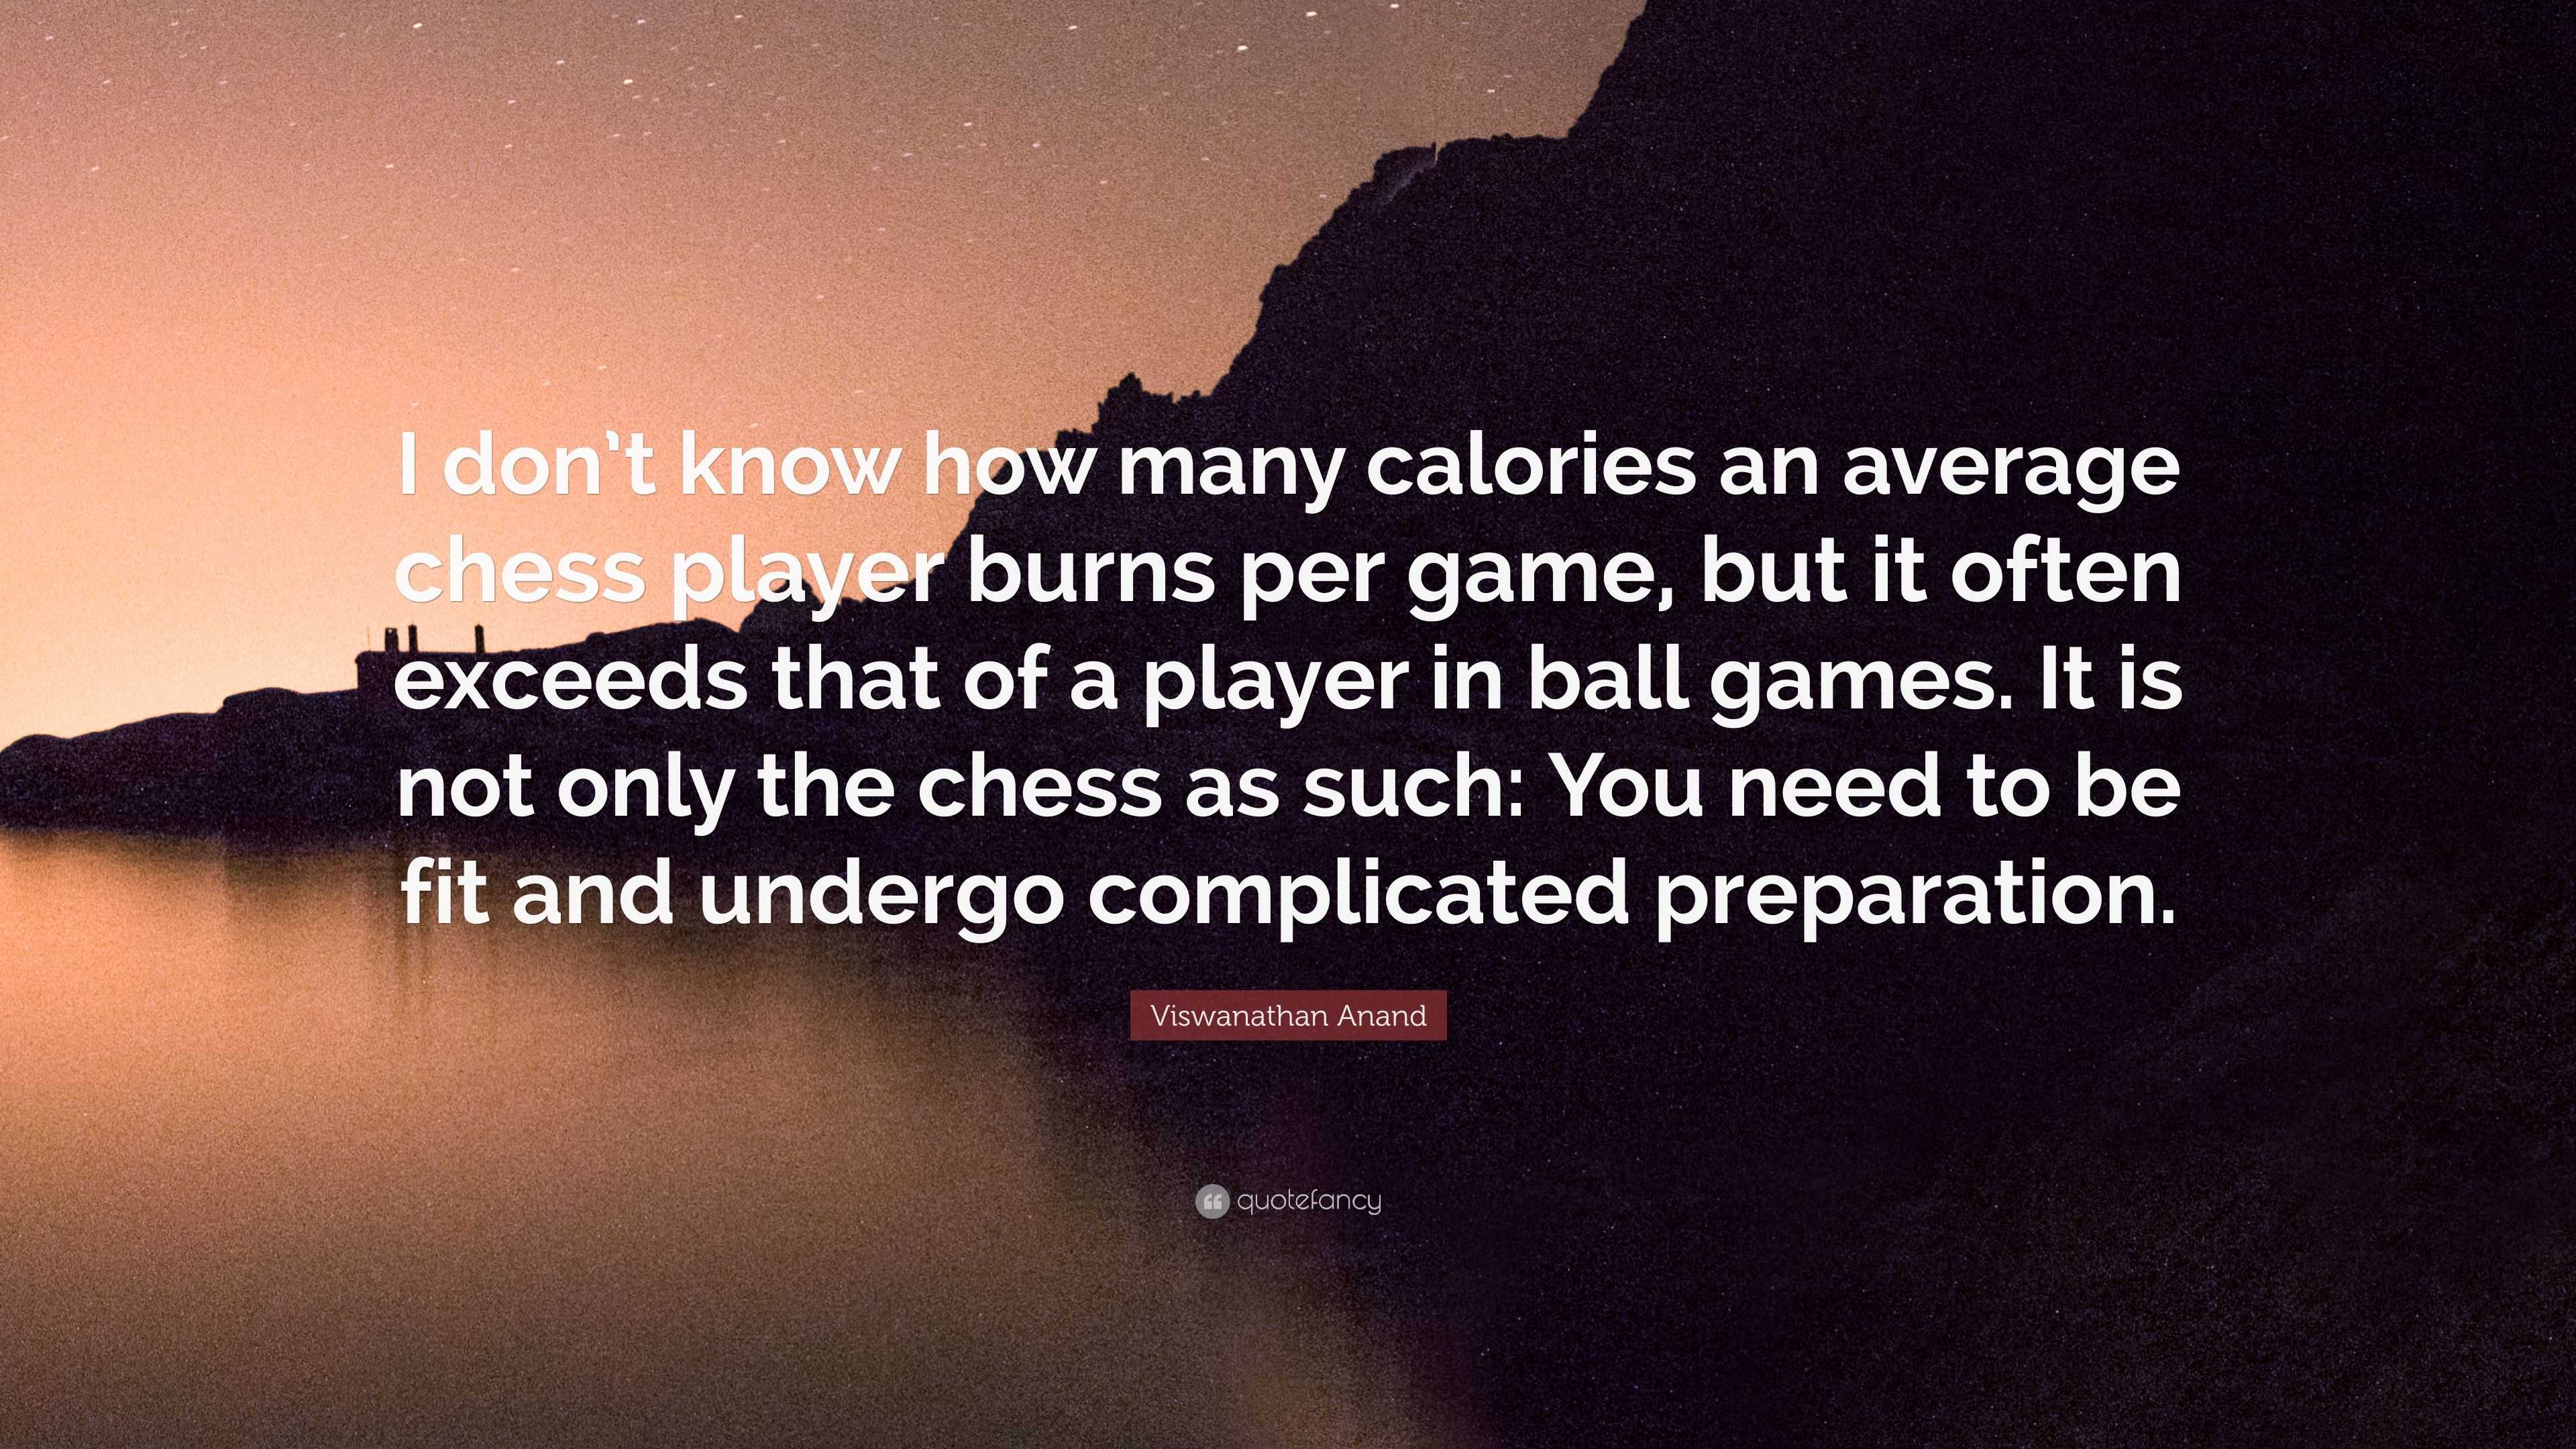 Viswanathan Anand Quote: “I don't know how many calories an average chess  player burns per game, but it often exceeds that of a player in ball gam”